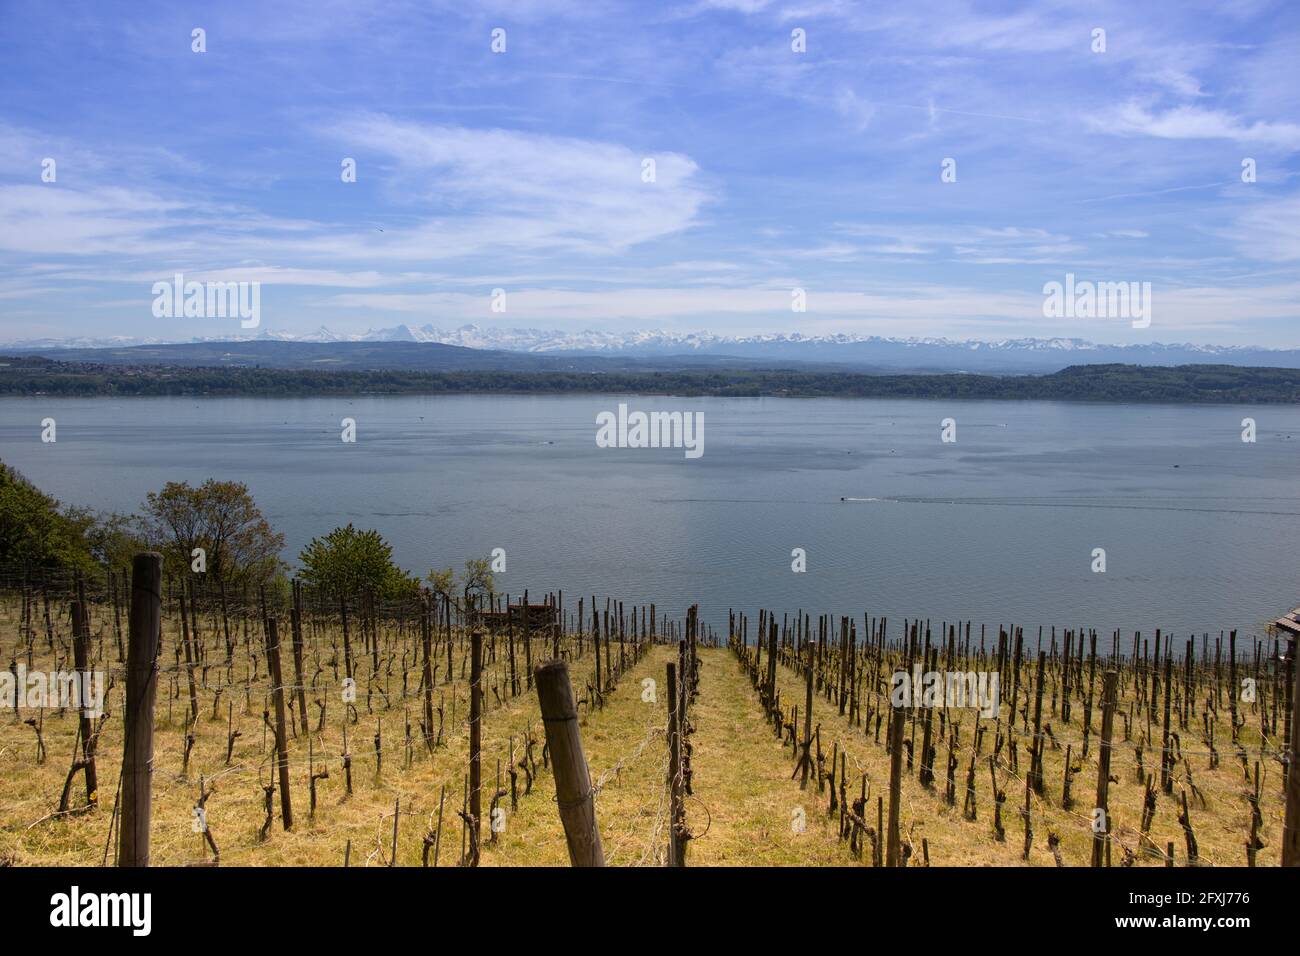 Vineyard in Ligerz at the lake Biel. Alpine panorama in the background. Stock Photo